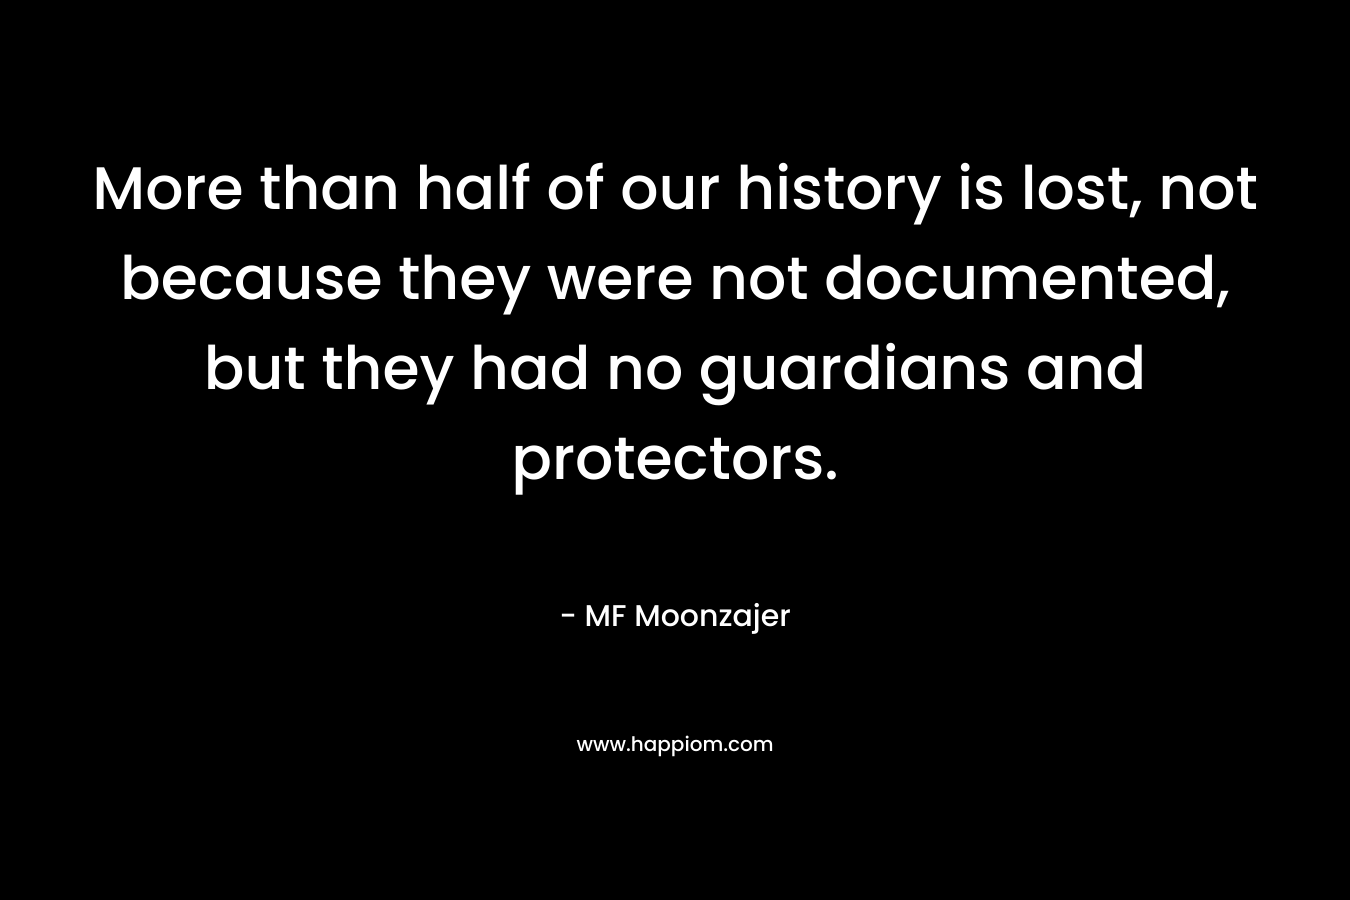 More than half of our history is lost, not because they were not documented, but they had no guardians and protectors.